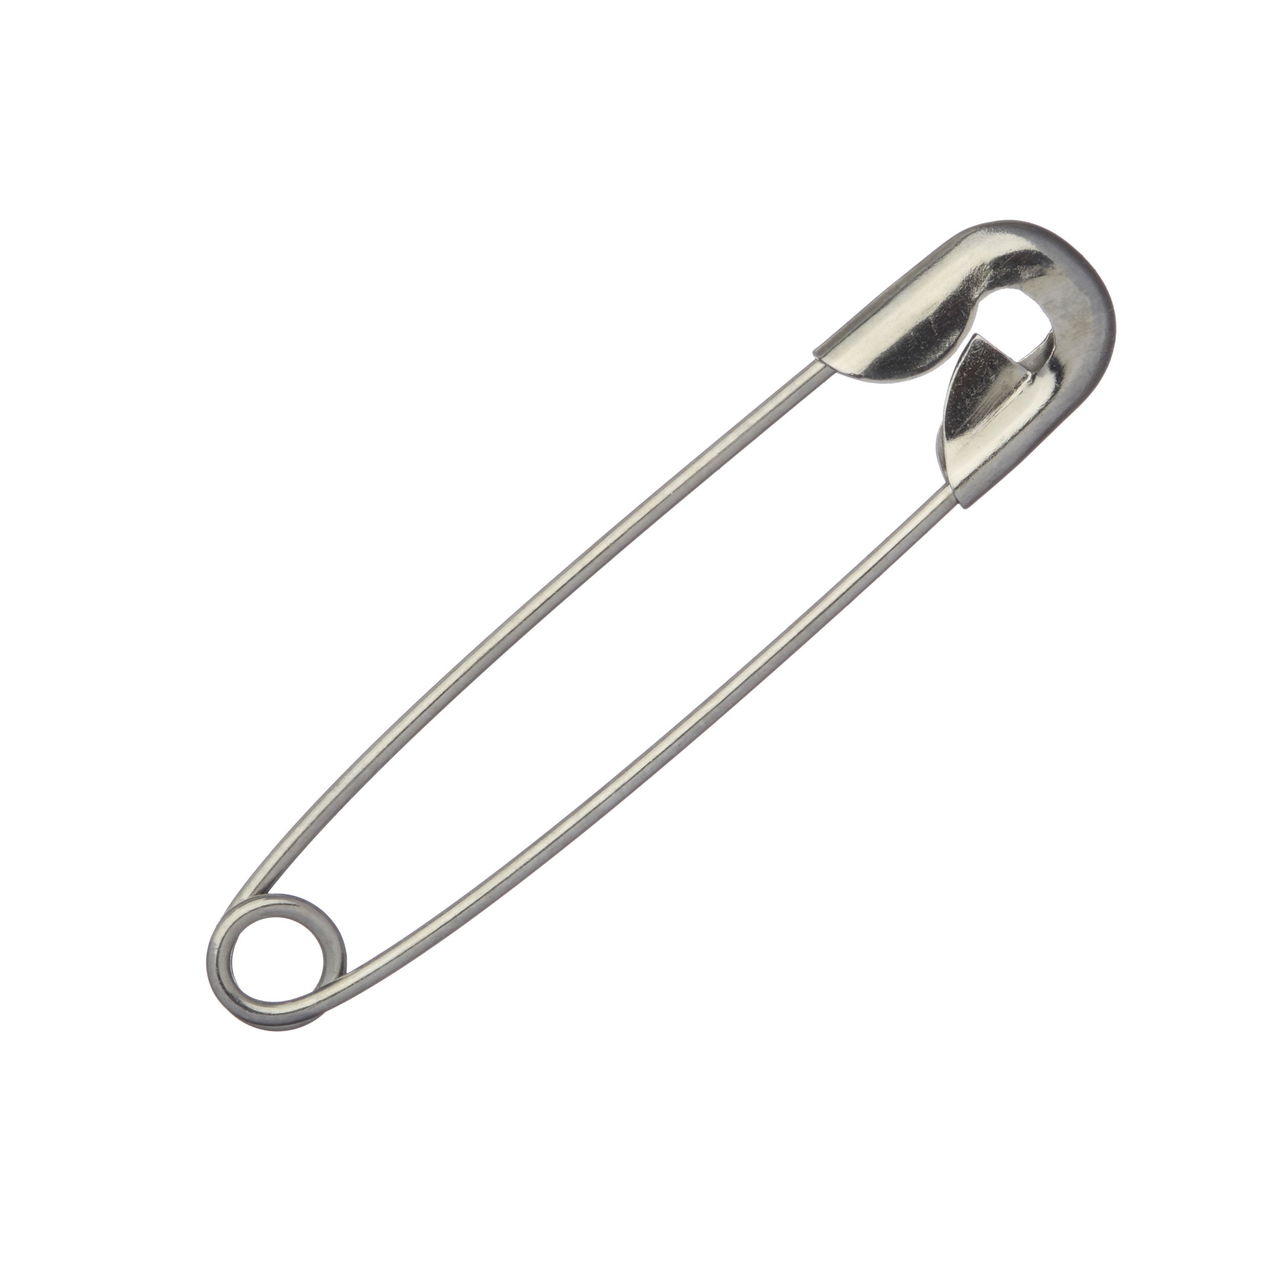 Thinkstock Slip a few safety pins in your purse for a fashion emergency.